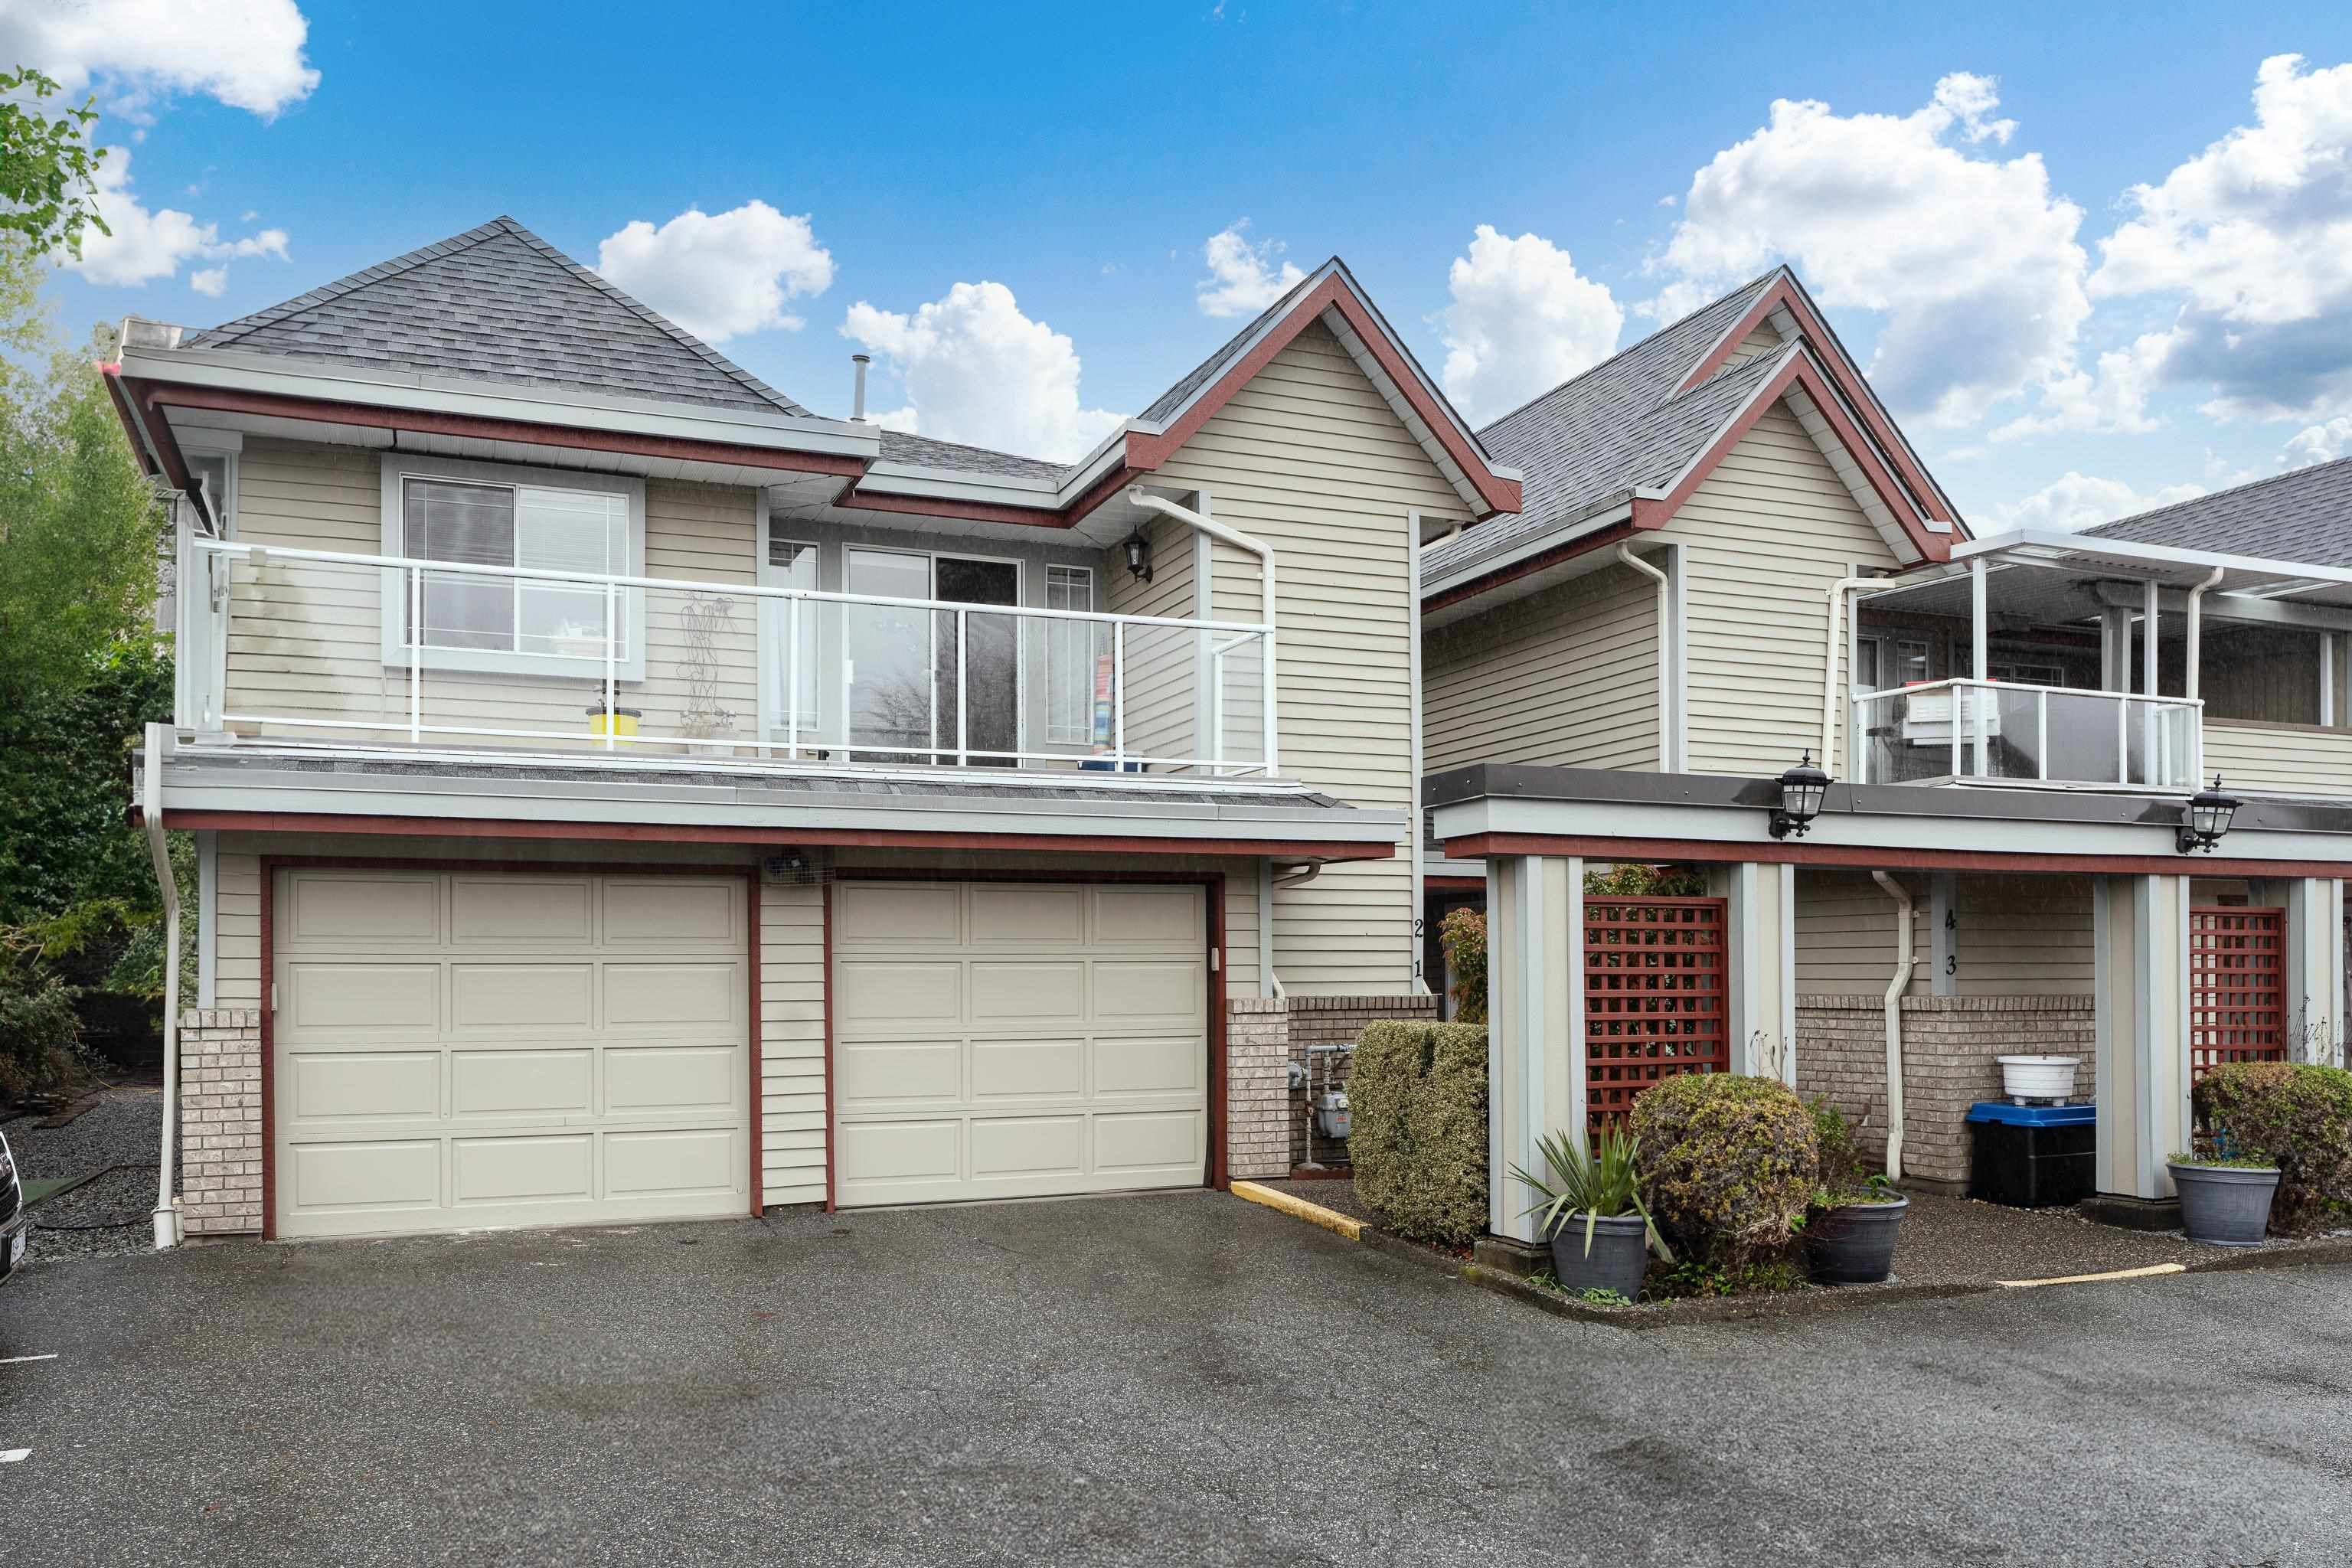 Neighbourhood Real Estate has just listed ANOTHER home in East Central, Maple Ridge